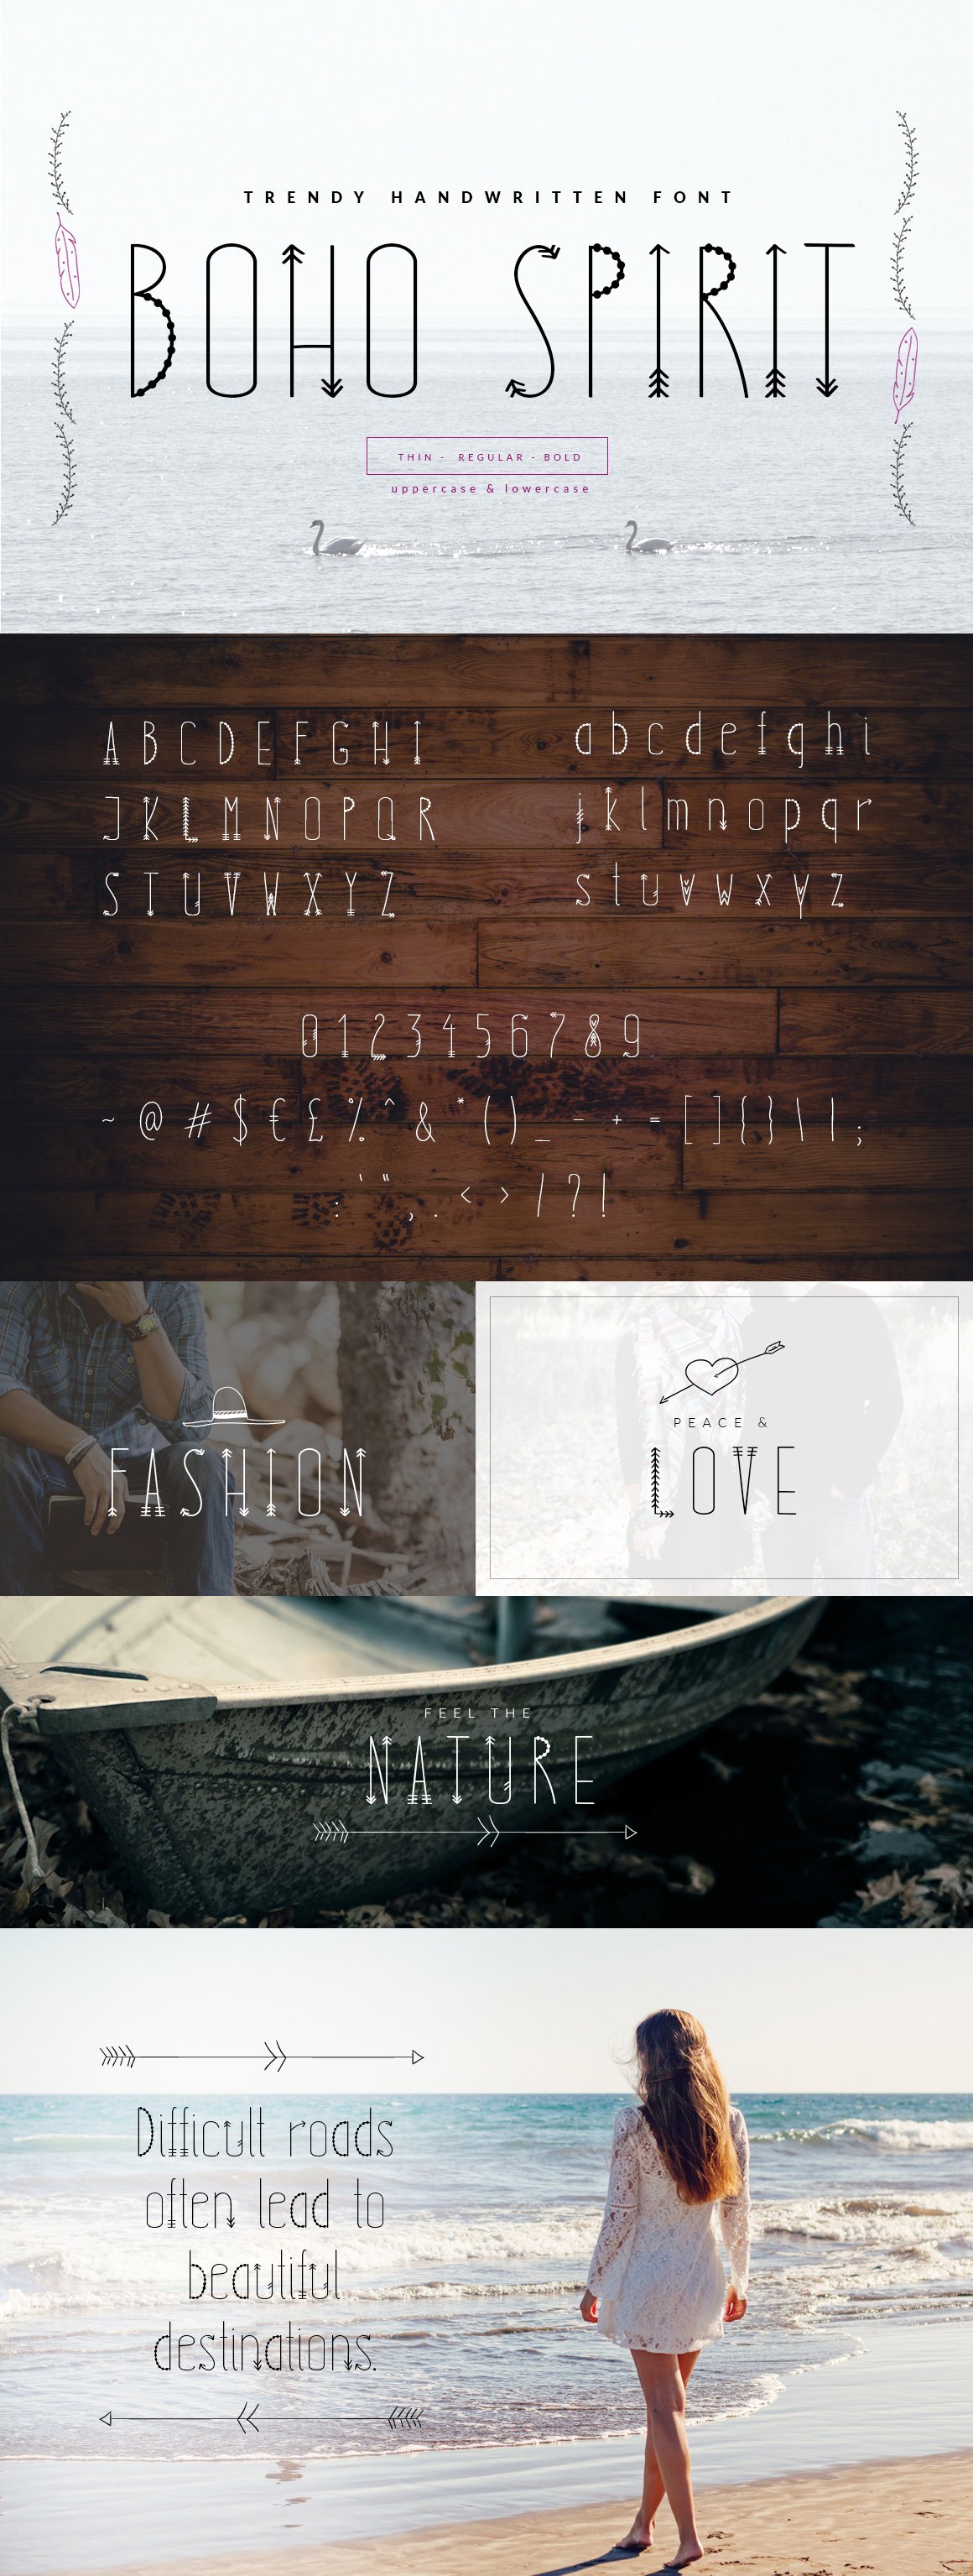 boho handwritten hipster font for quotes and branding 248